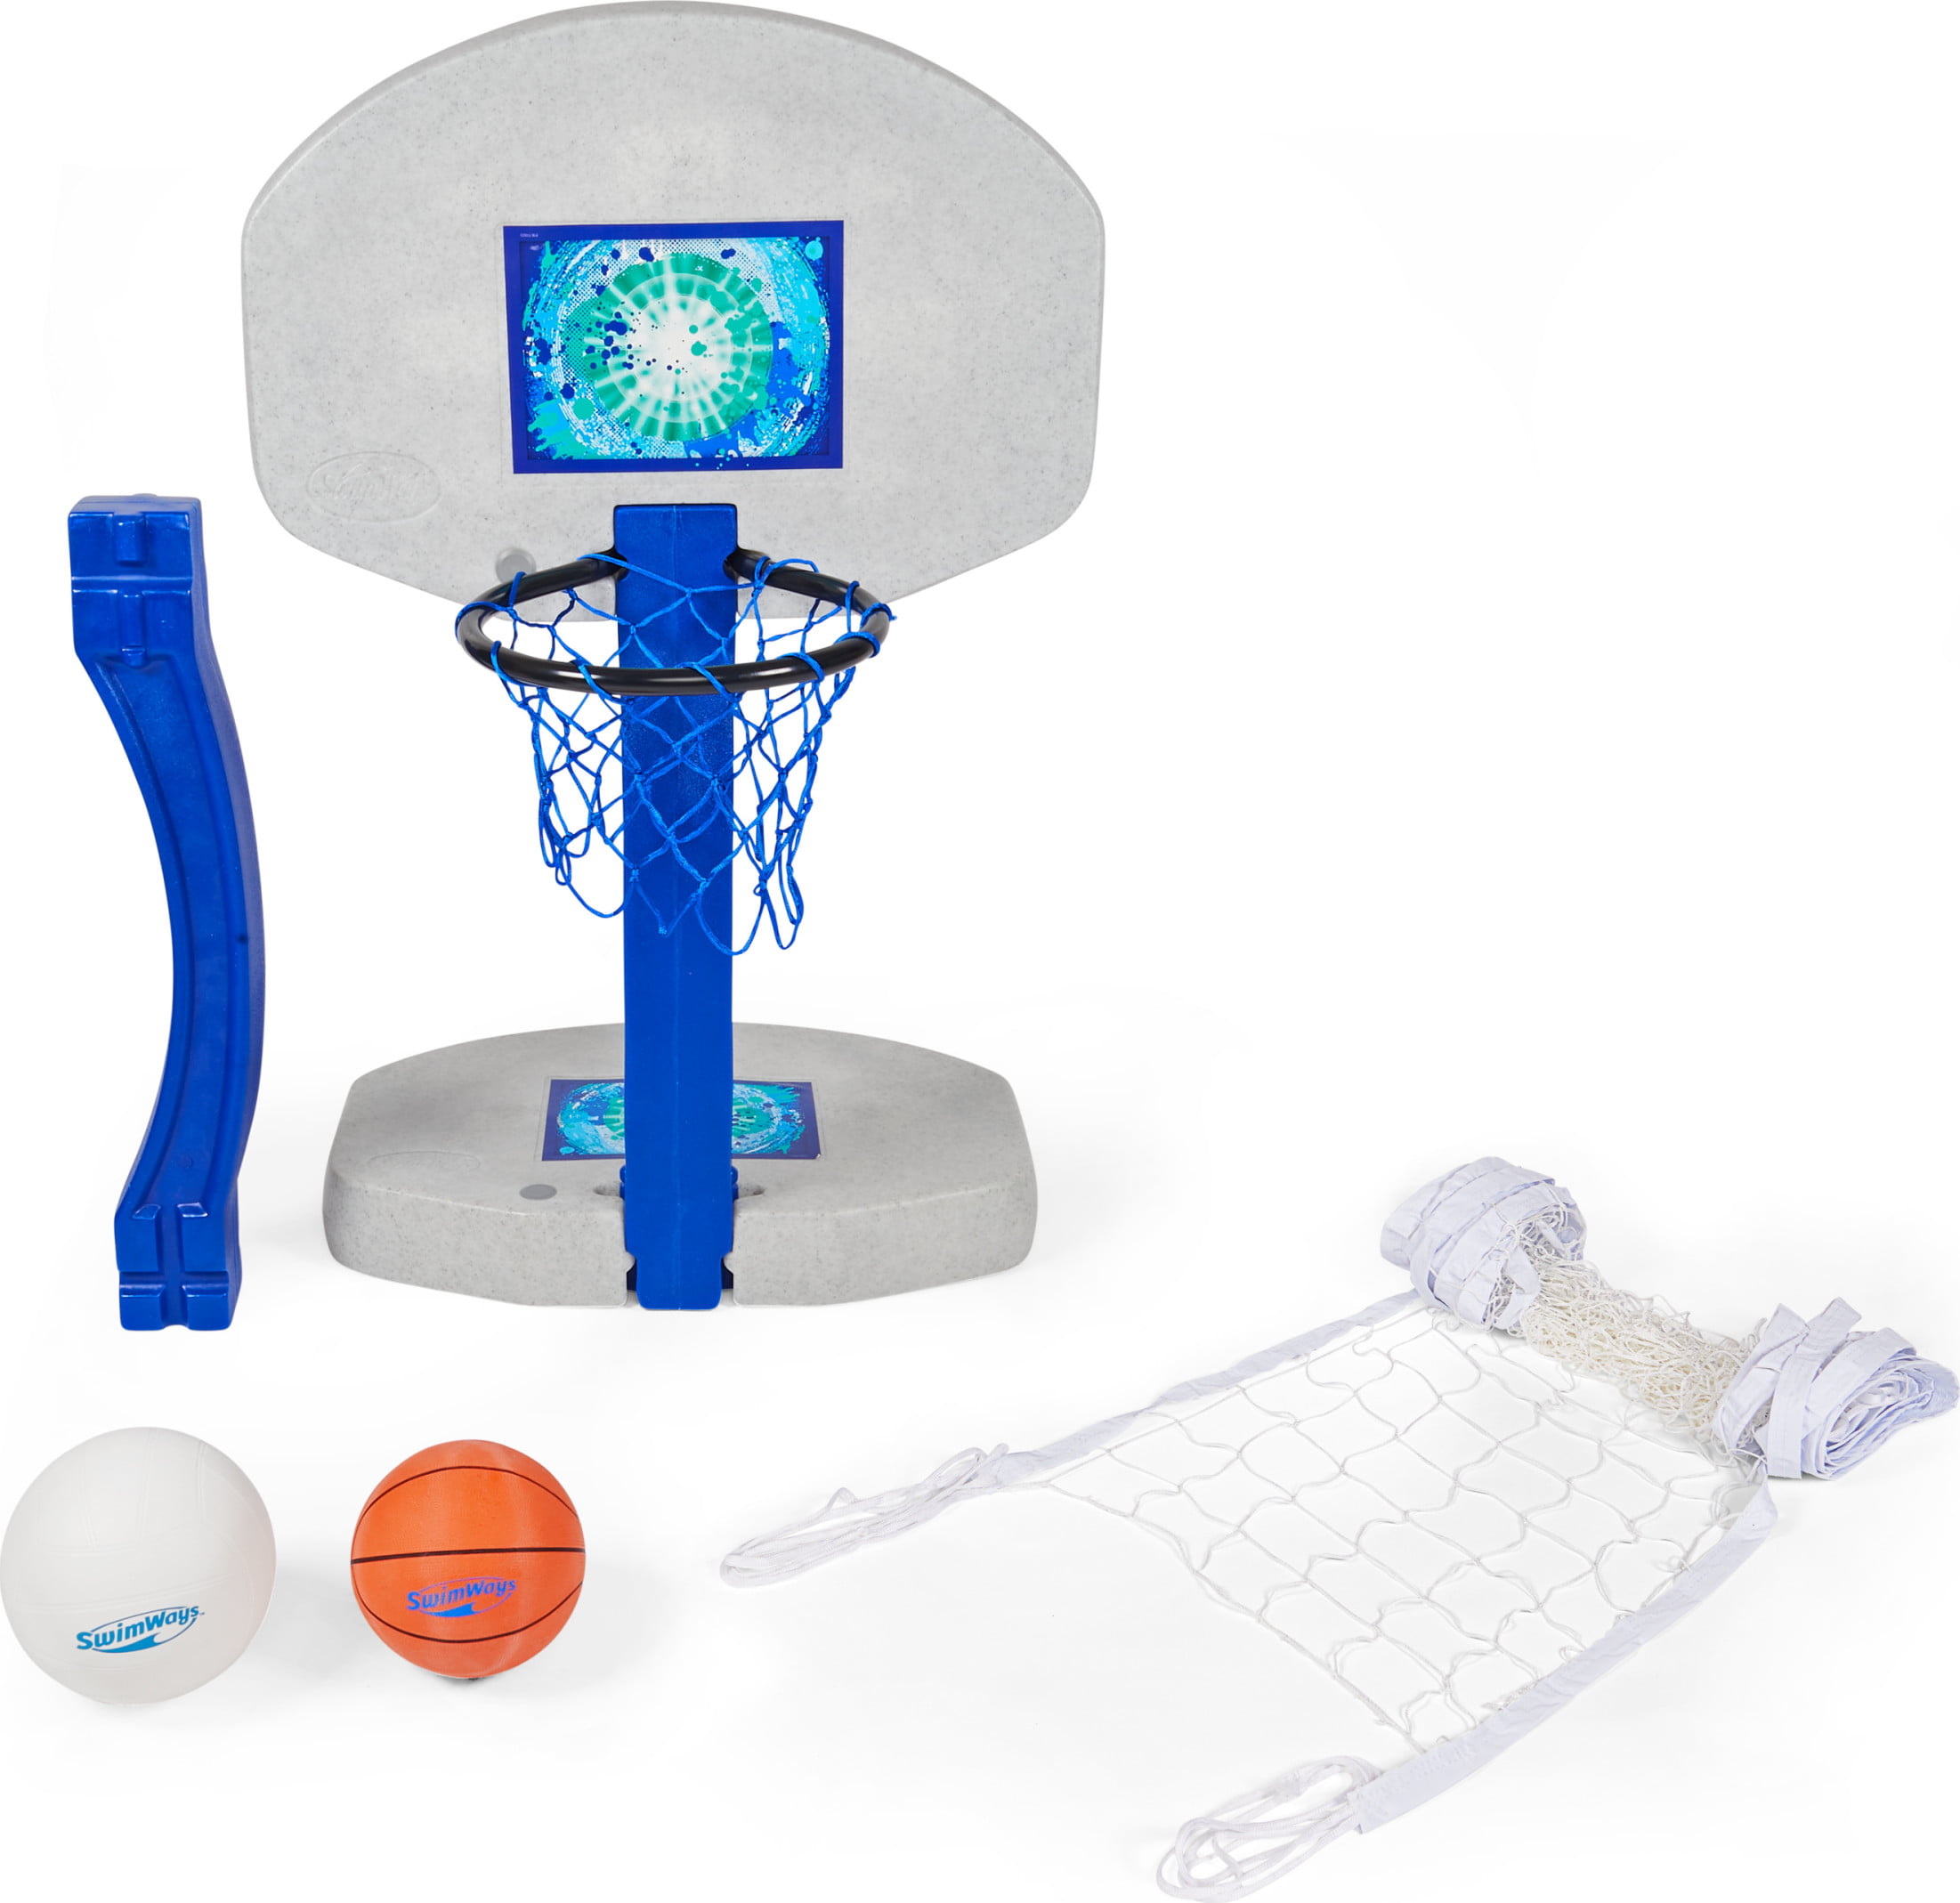 Intex Floating Pool Volleyball Game & Floating Hoops Basketball Game with Exclusive Mattys Toy Stop 4.25 Vinyl Basketball Gift Set Bundle 3 Pack